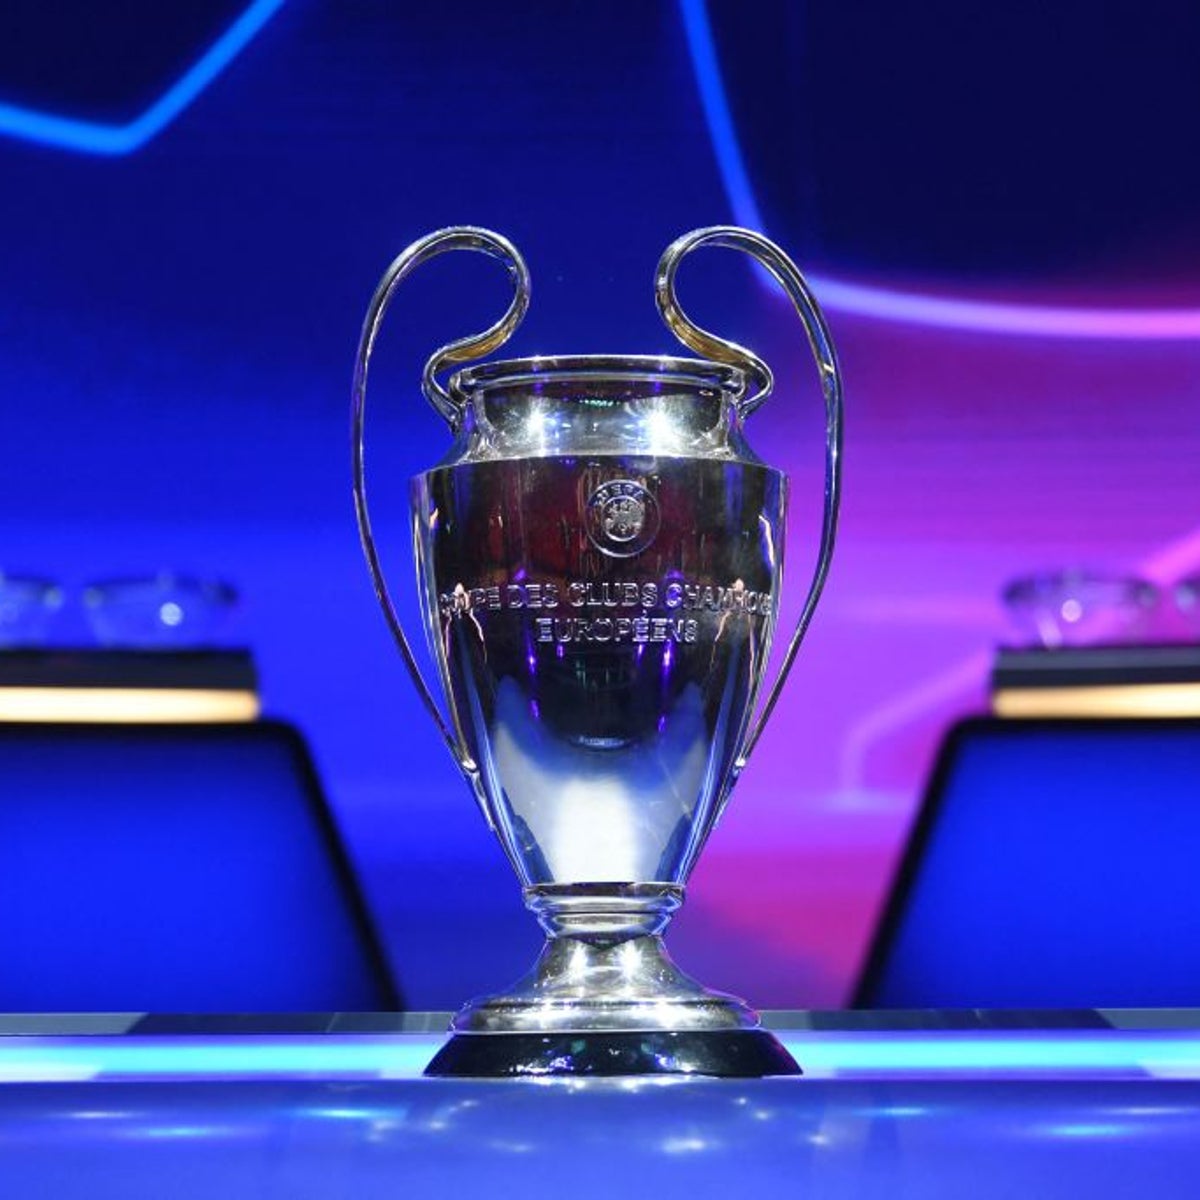 Champions League Round of 16 draw surfaces